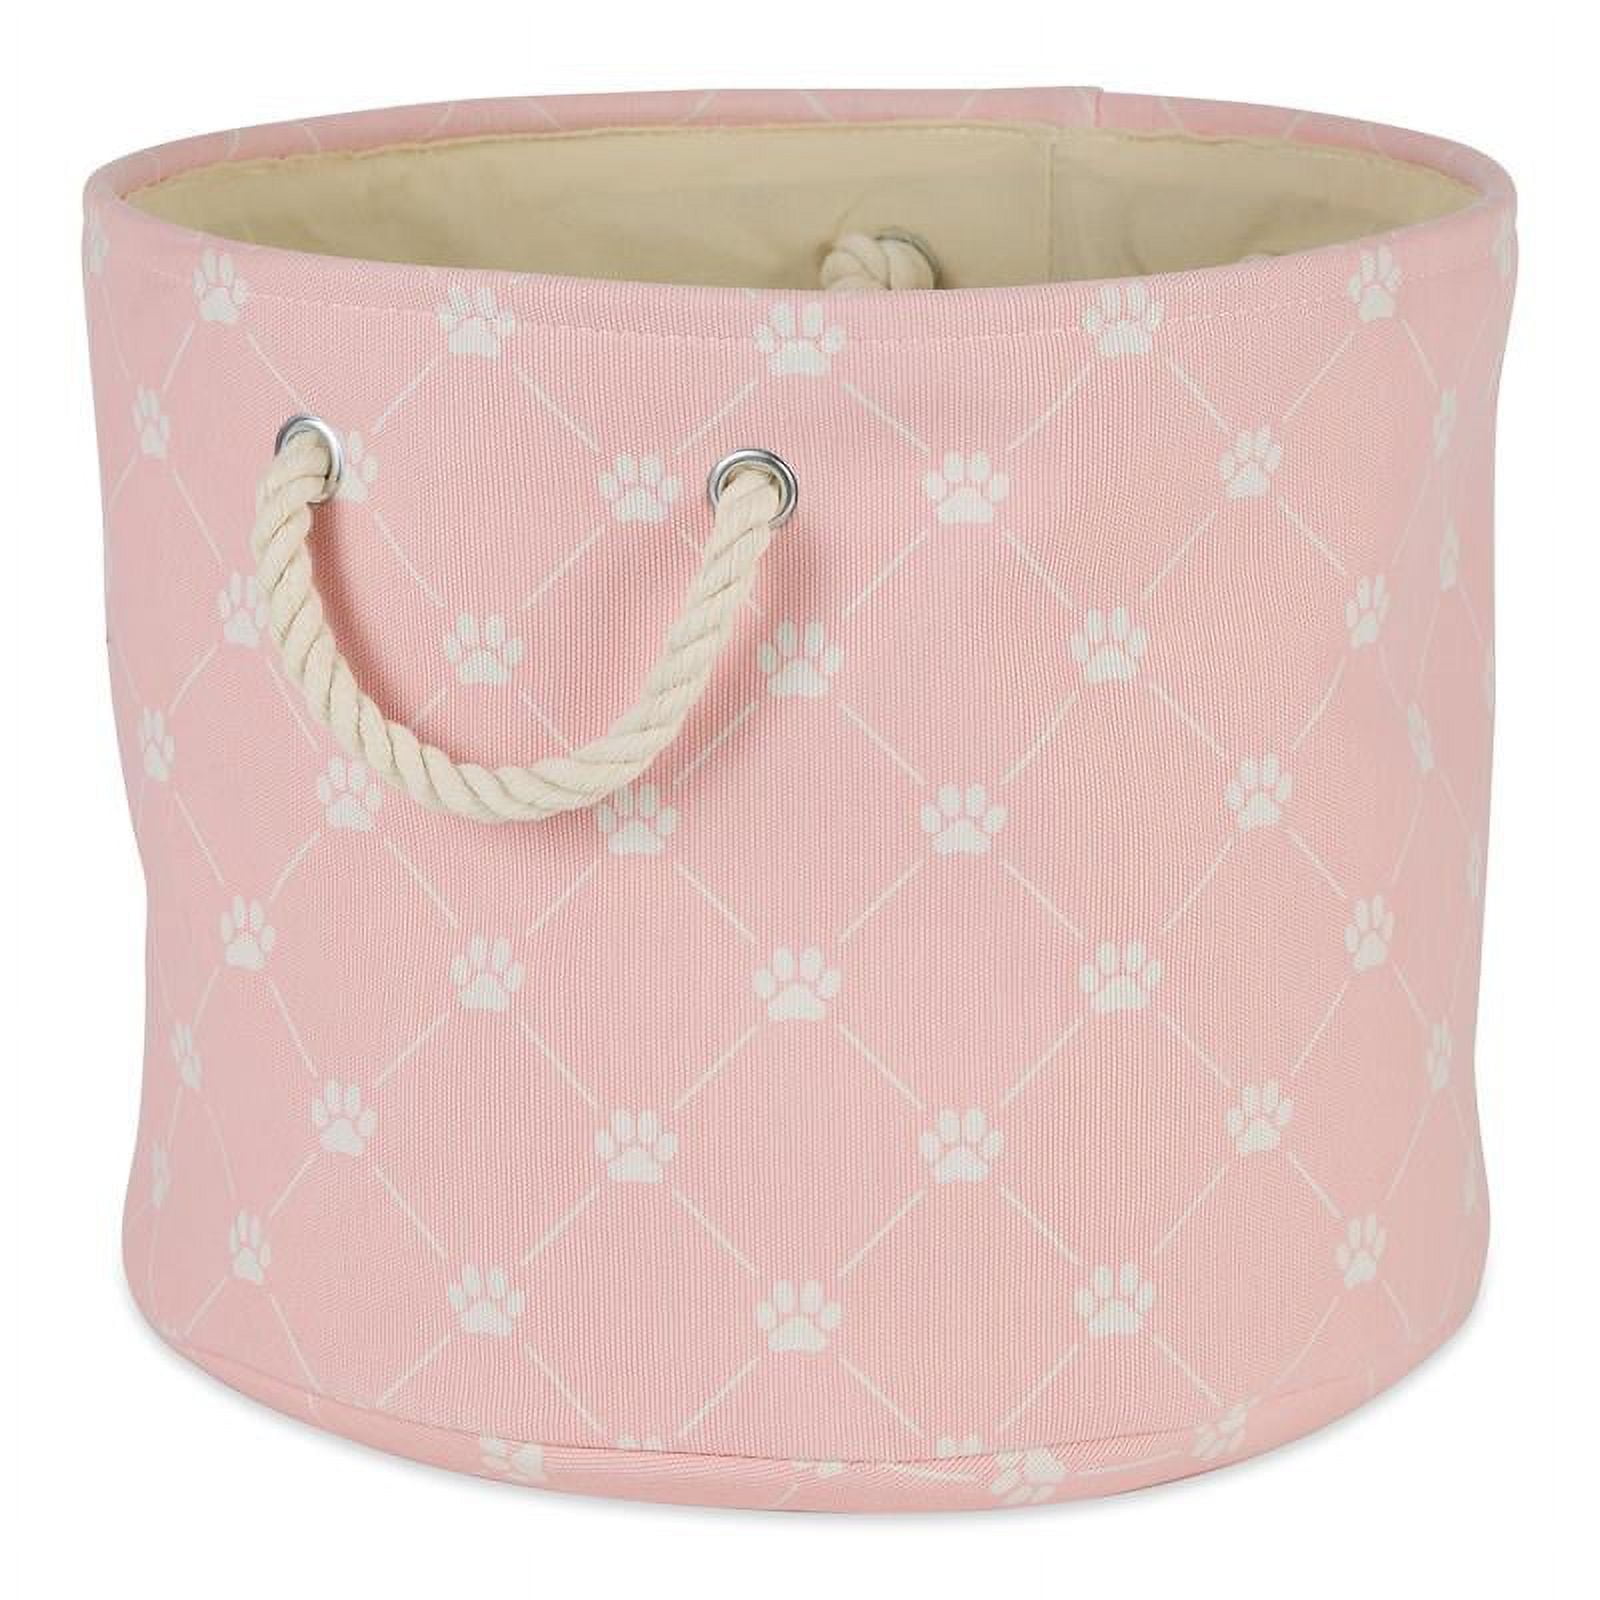 Picture of Design Imports CAMZ14258 Polyester Trellis Paw Round Pet Bin, Pink